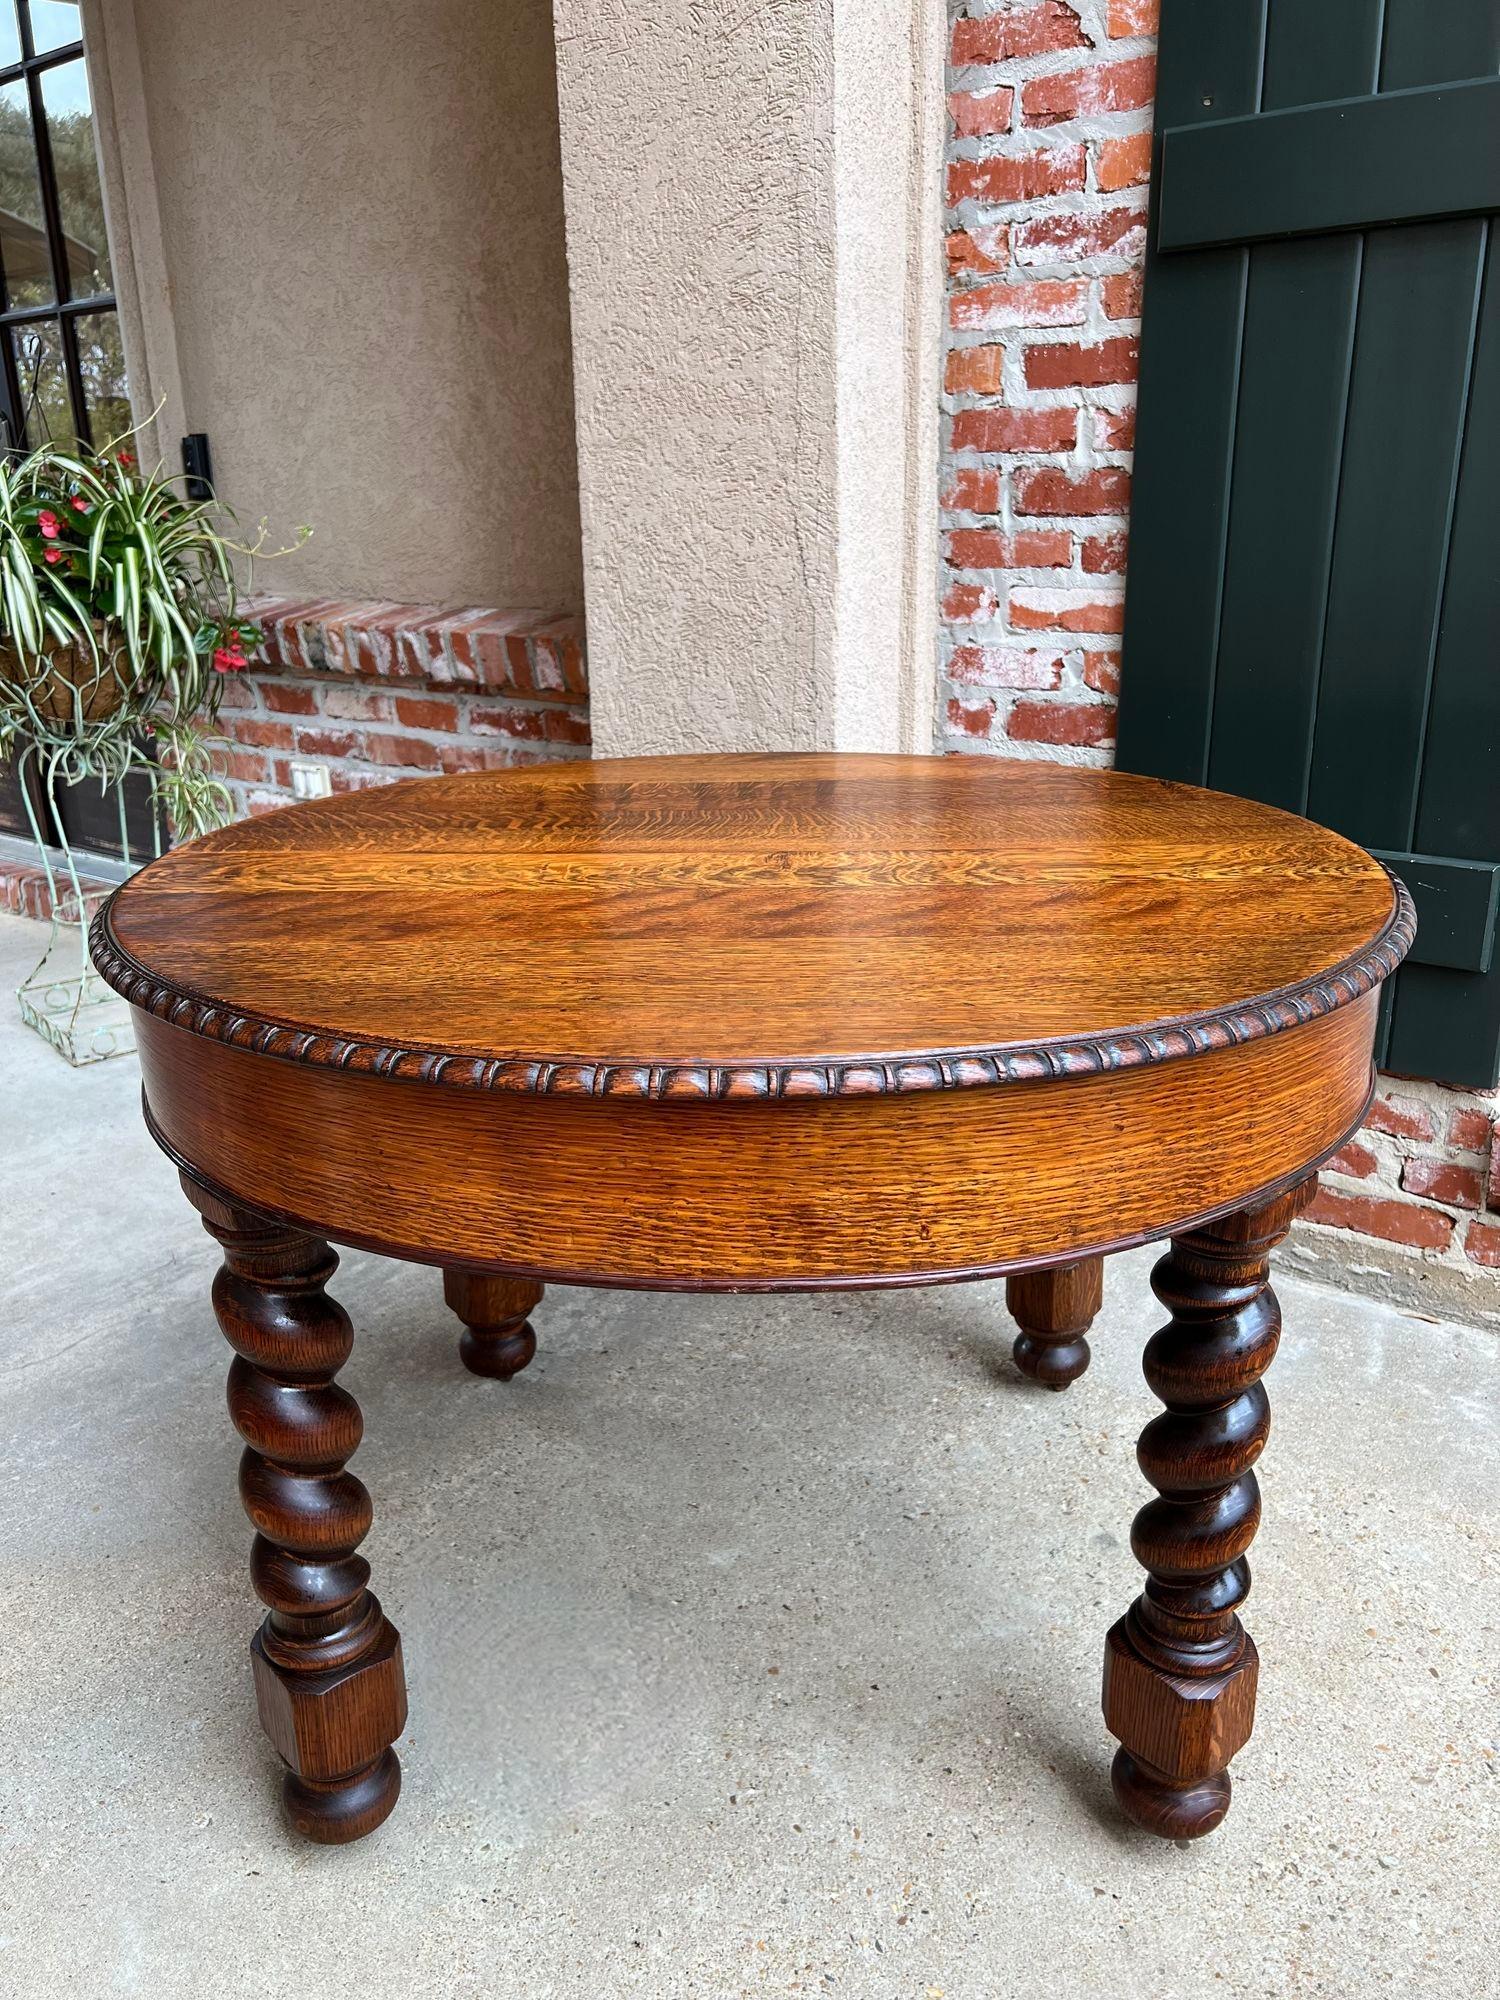 19th Century English round dining center table barley twist carved tiger oak.

 Direct from England, a beautiful round antique dining or center table! The round top features outstanding tiger oak grain and a large, beveled edge over the extra wide